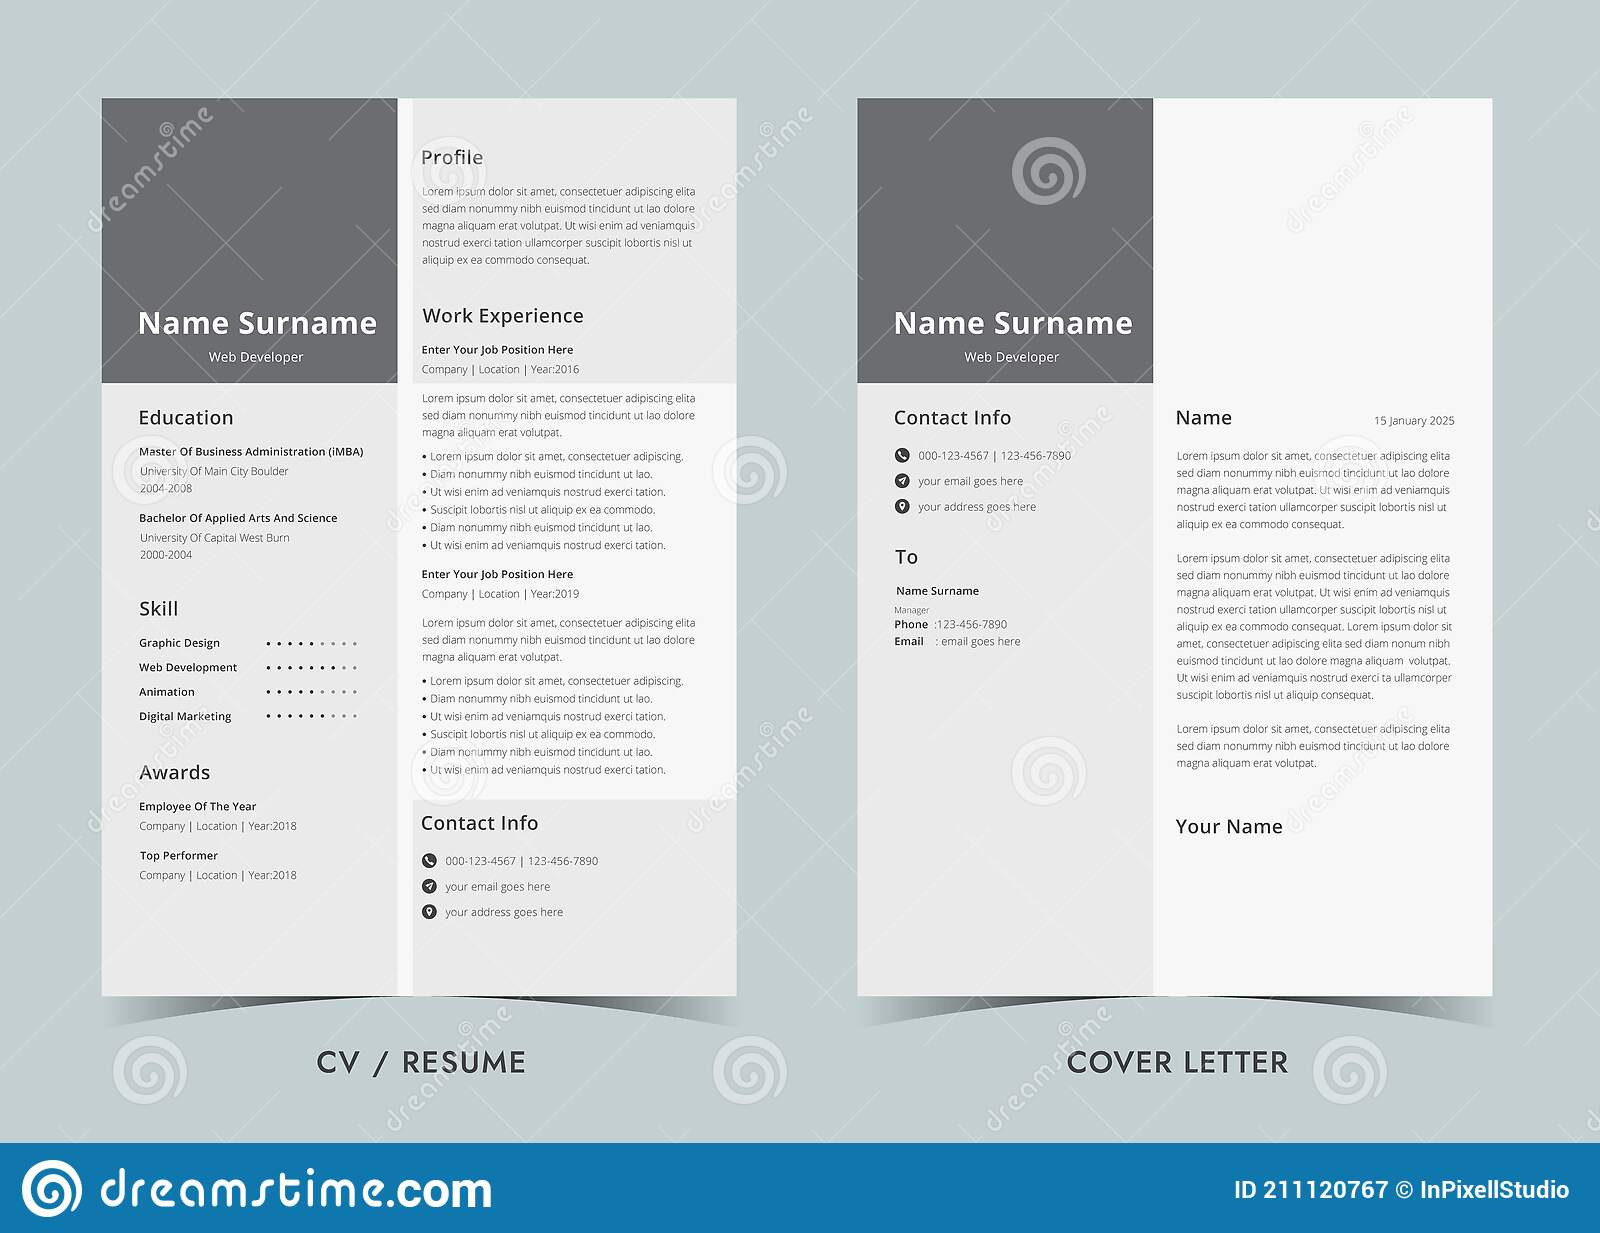 resume template cv professional cover letter minimalist image